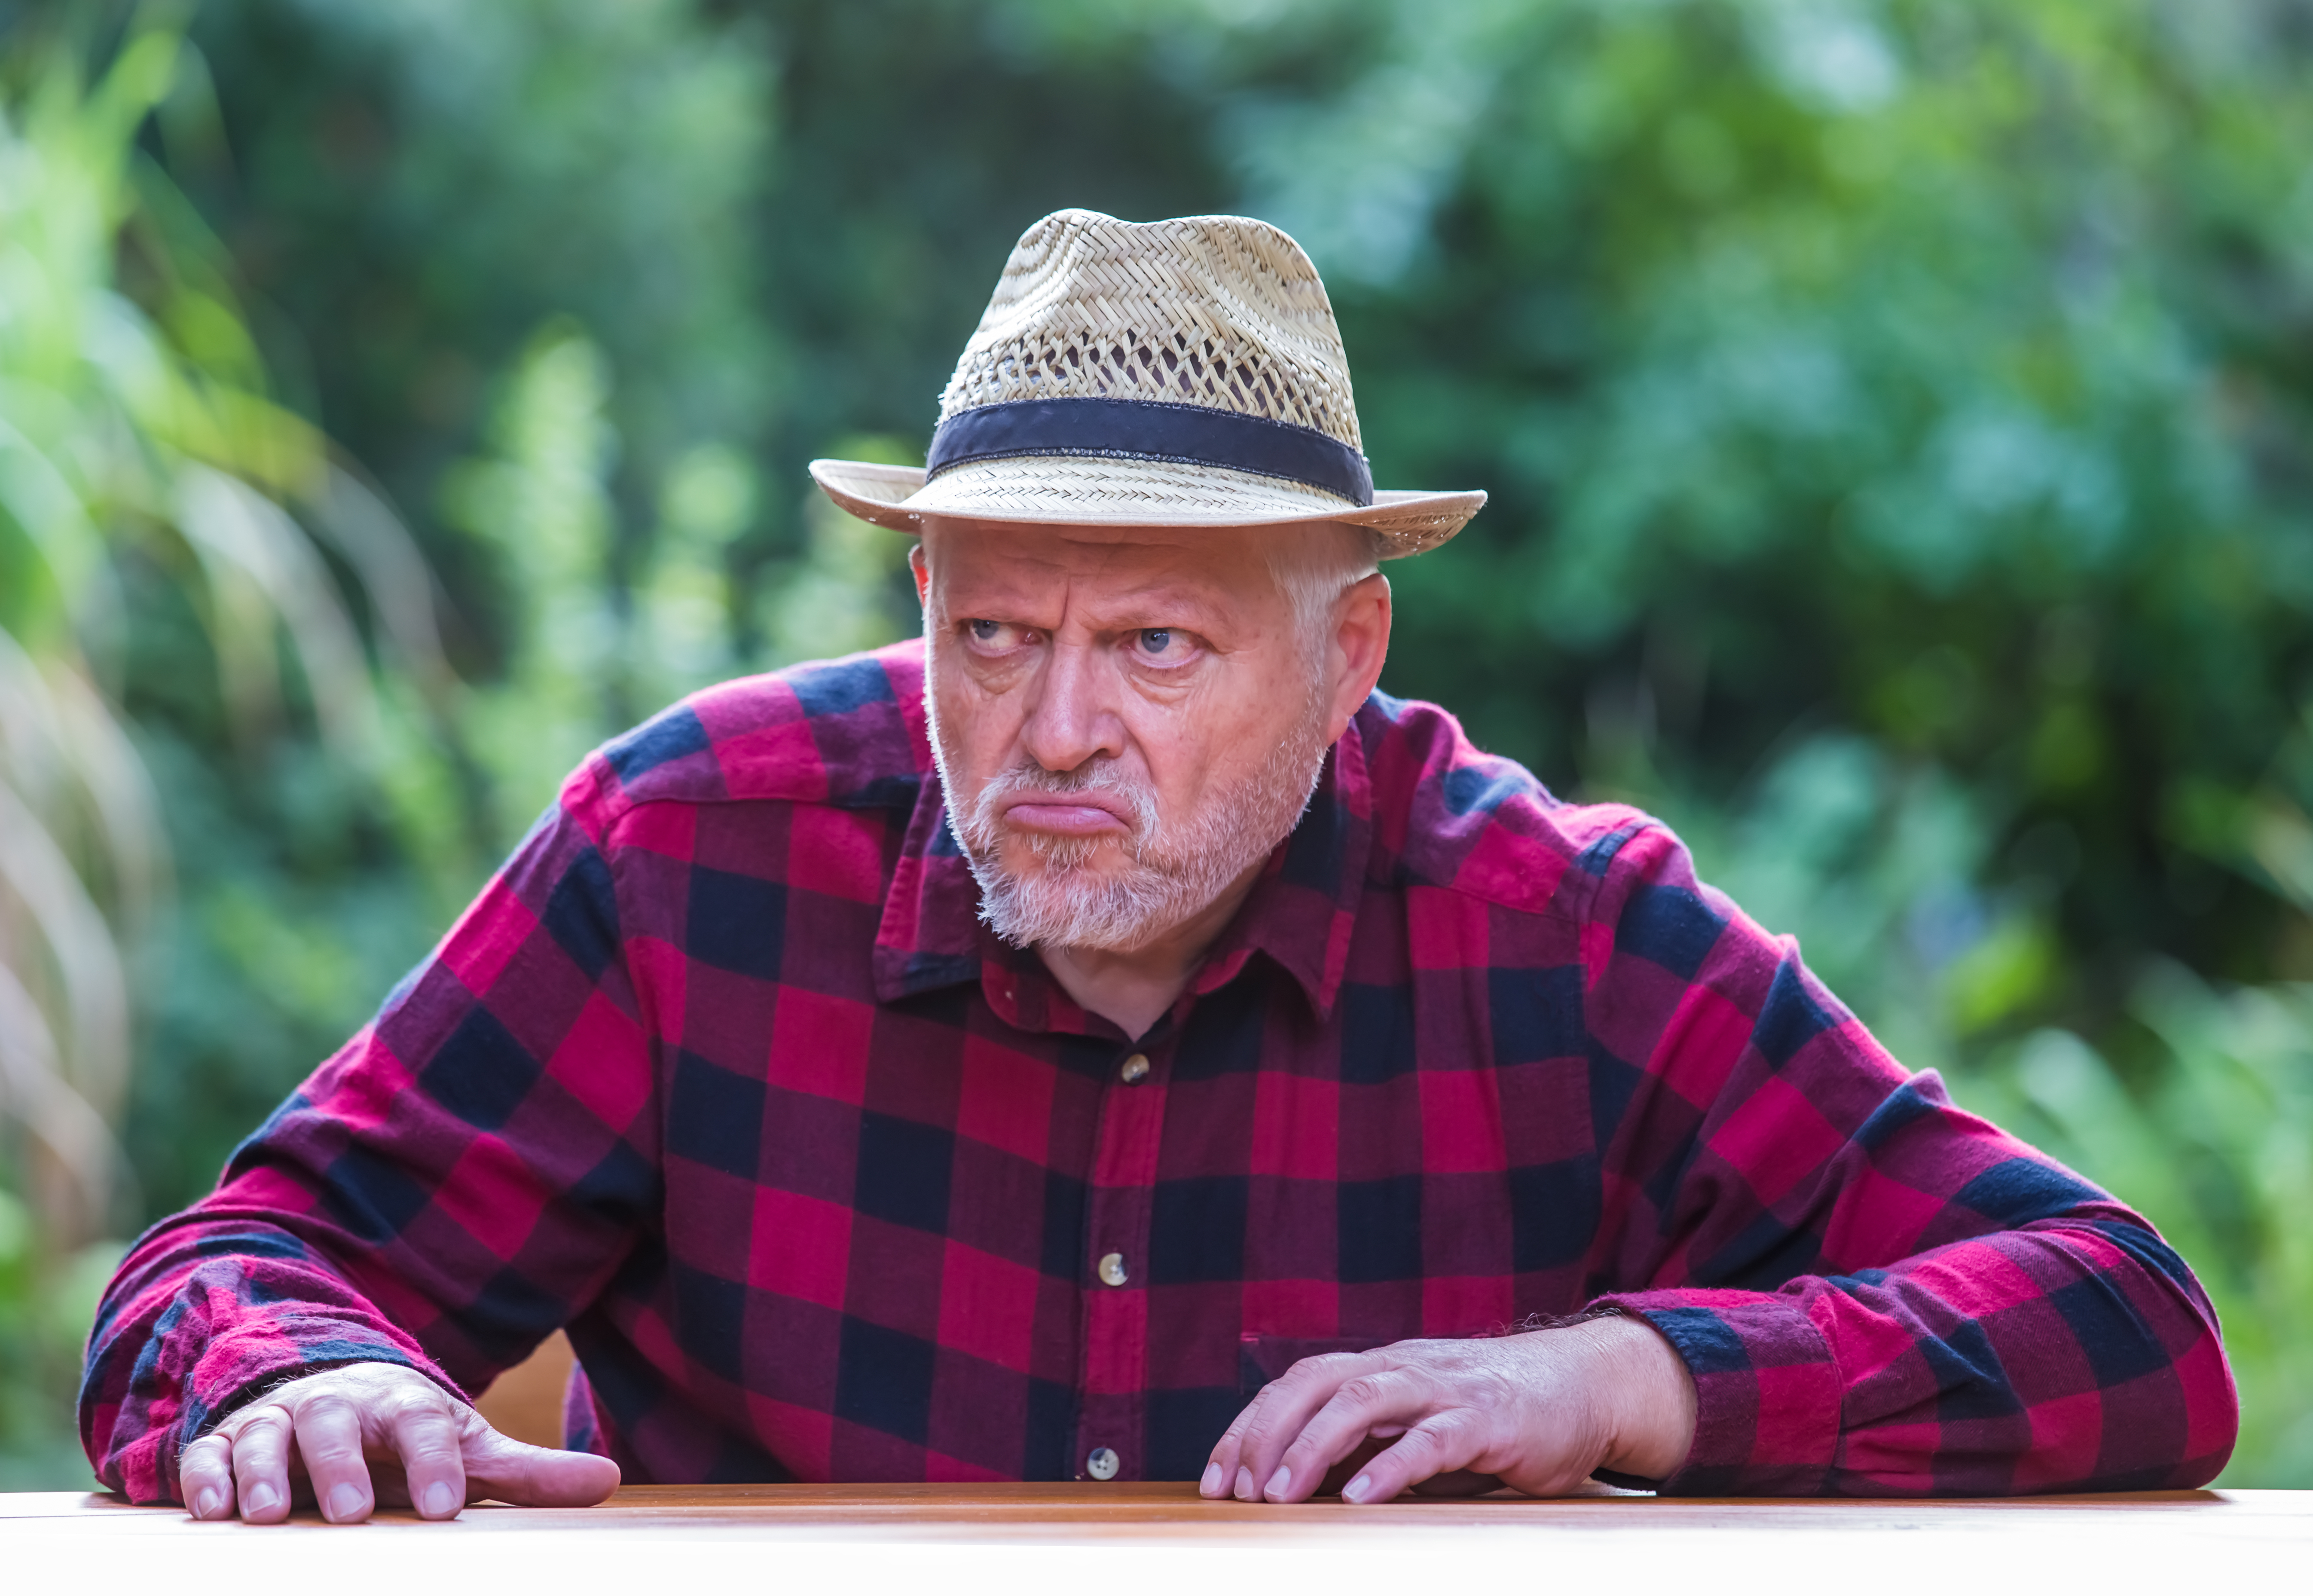 An elderly man in a hat is sitting with bad mood at a table in the garden. | Source: Shutterstock